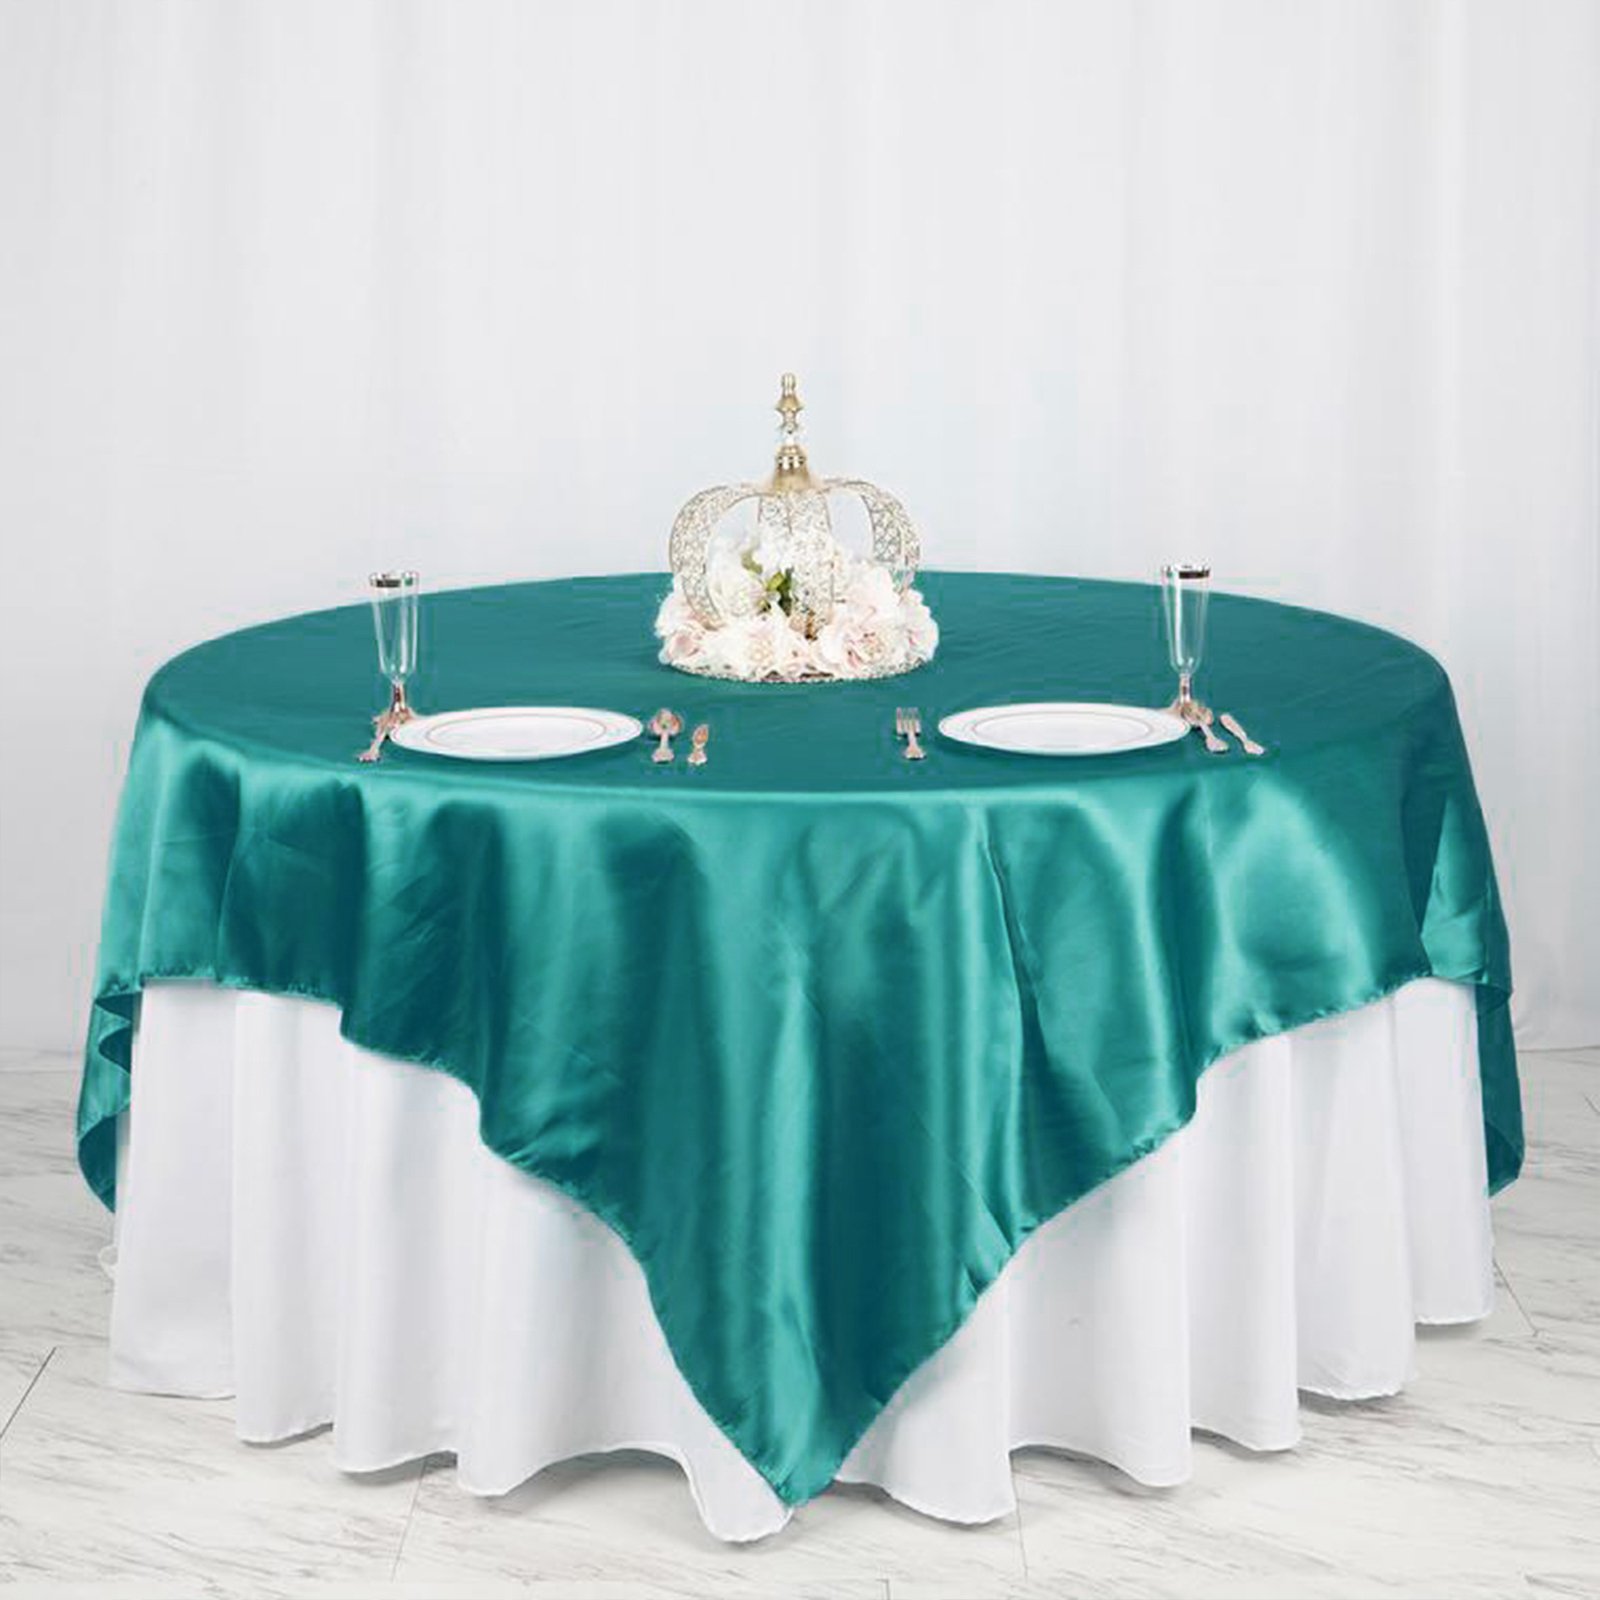 Efavormart 5pcs 72 Satin Square Tablecloth Overlay for Wedding Catering Party Table Decorations Silver Square Tablecloth Cover